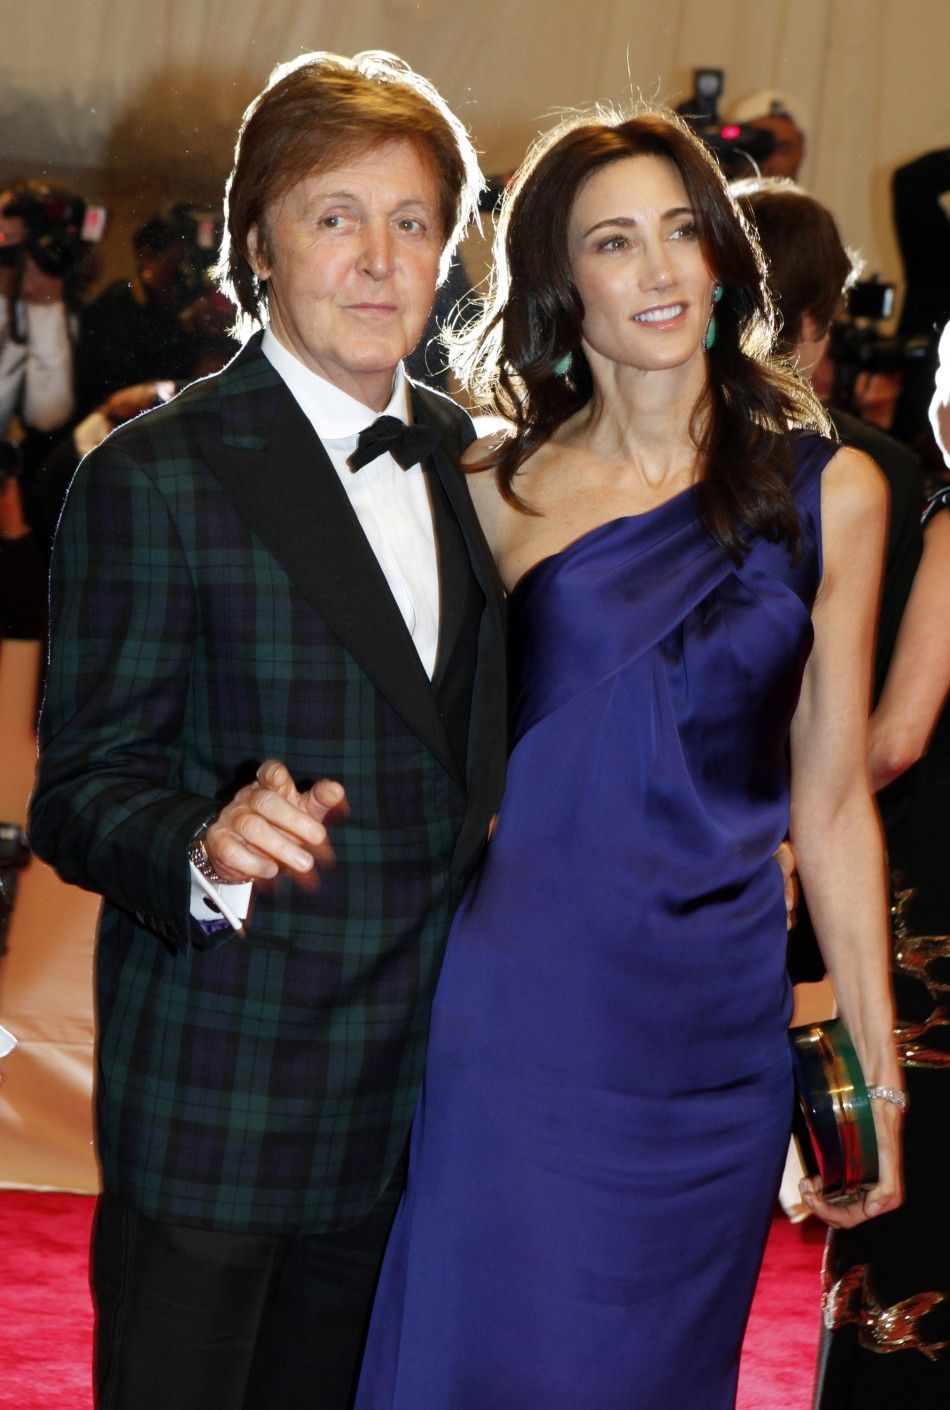 Nancy Shevell and Paul McCartney pose on arrival at the Metropolitan Museum of Art Costume Institute Benefit celebrating the opening of Alexander McQueen Savage Beauty in New York